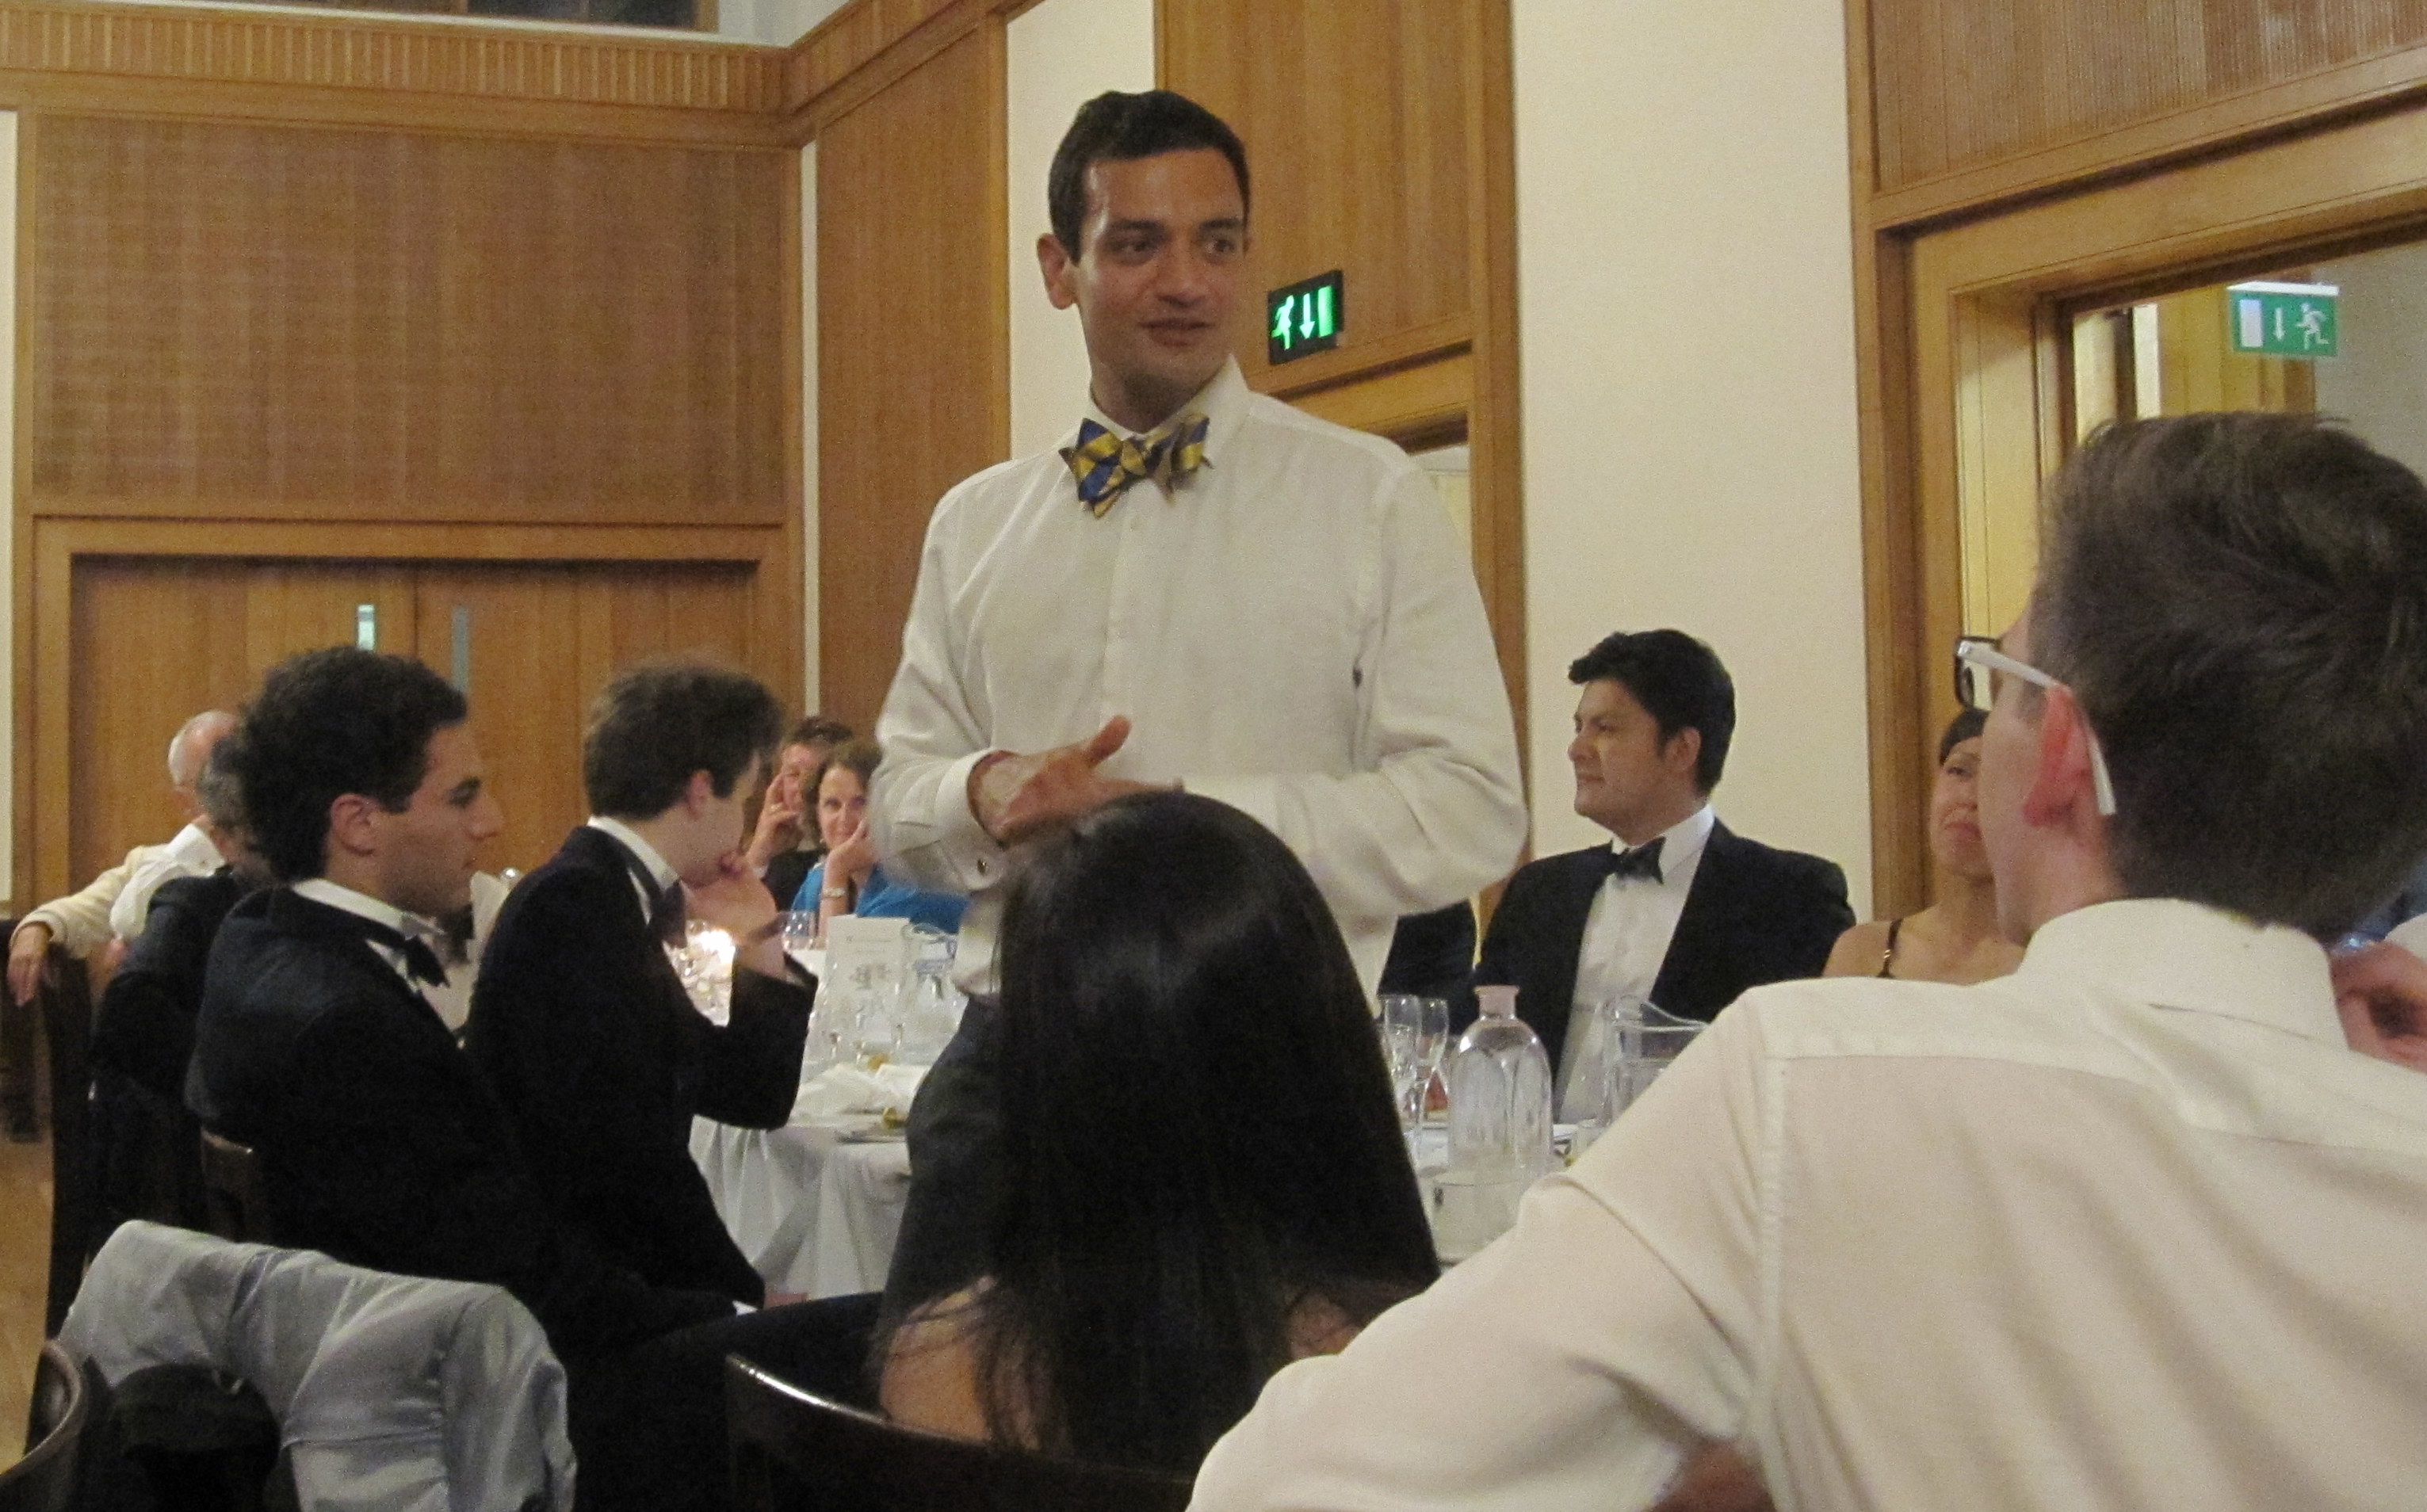 Dr Dhruv Panchal at the Boat Club dinner